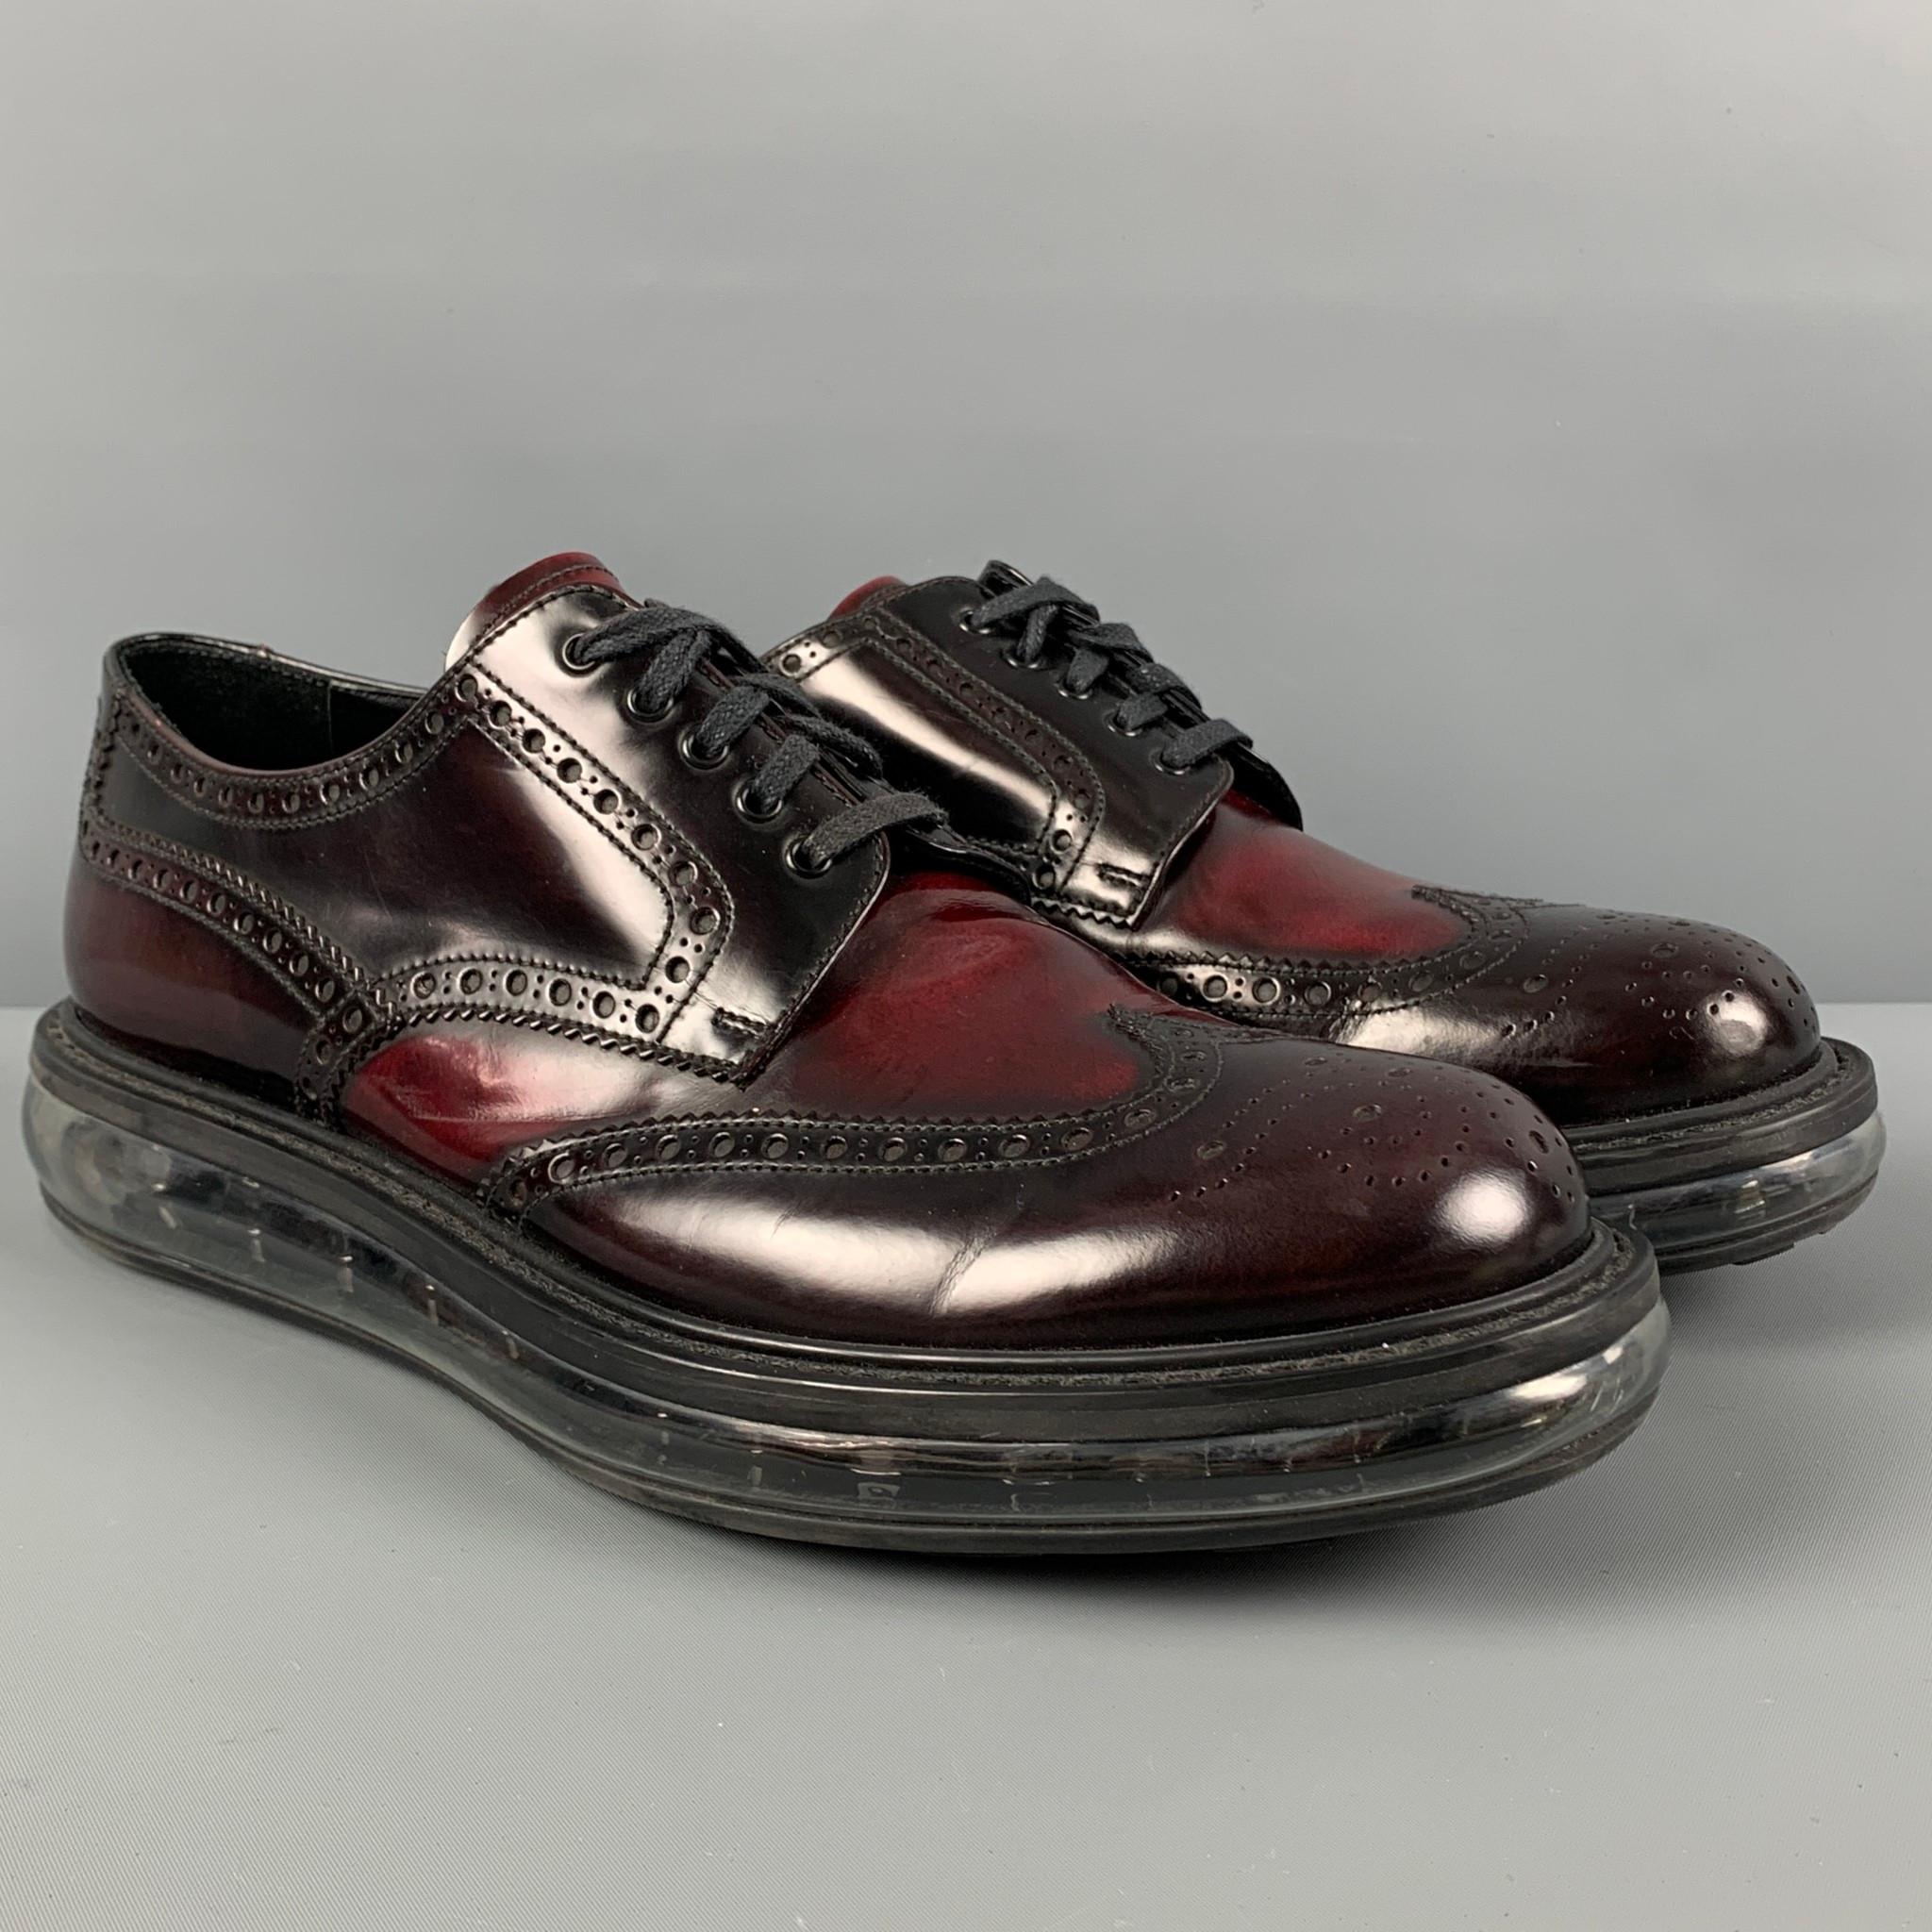 PRADA shoes comes in a burgundy perforated leather featuring a transparent rubber sole and a lace up closure. Made in Italy. 

Very Good Pre-Owned Condition.
Marked: 2EE098 9.5

Outsole: 13 in. x 4.5 in. 